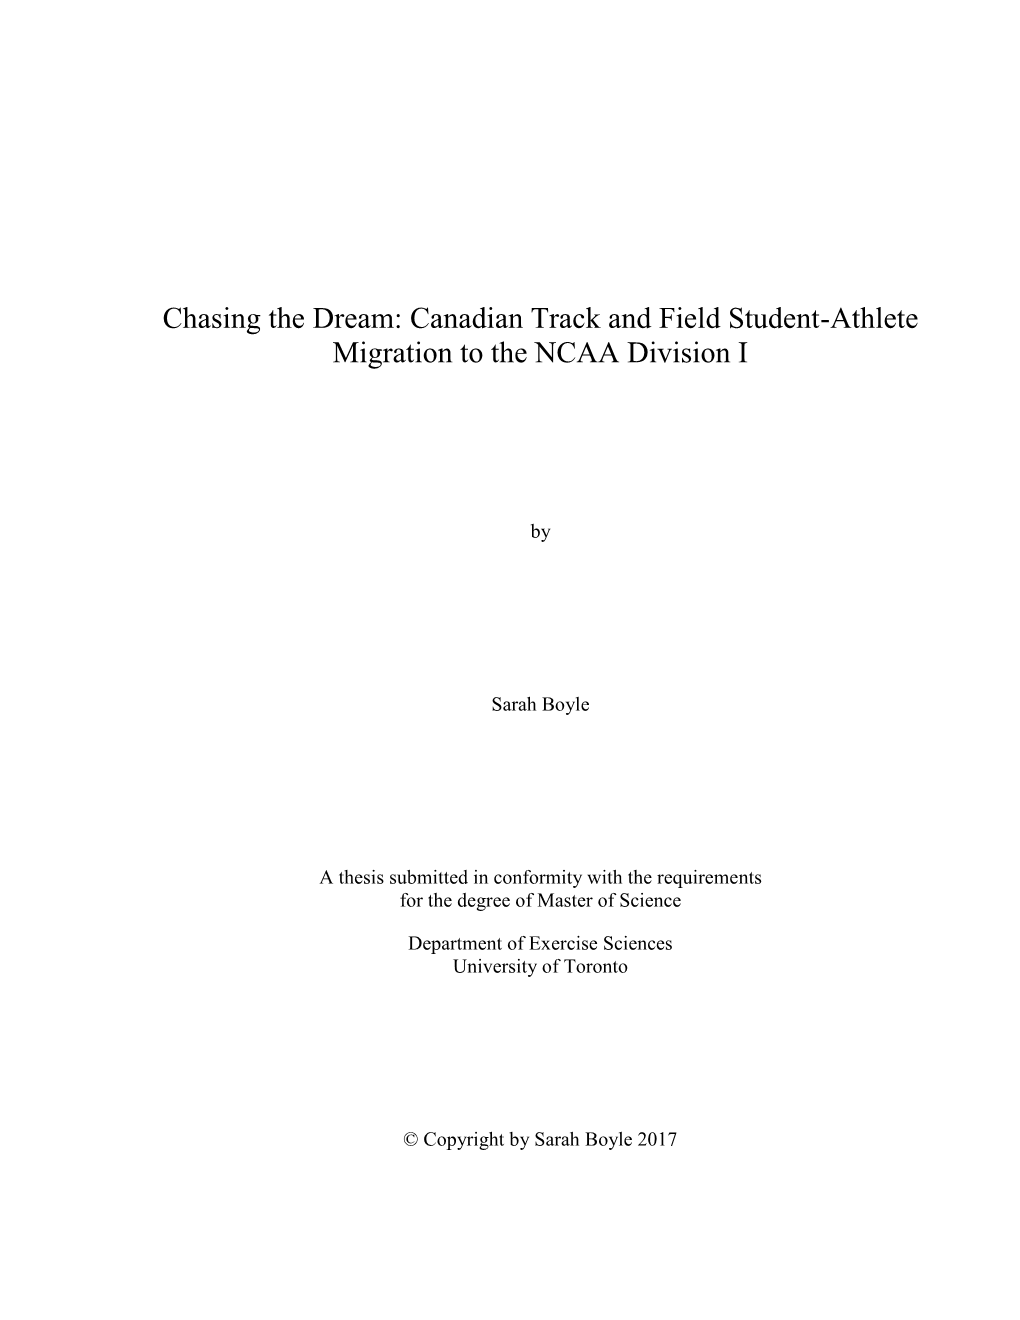 Chasing the Dream: Canadian Track and Field Student-Athlete Migration to the NCAA Division I